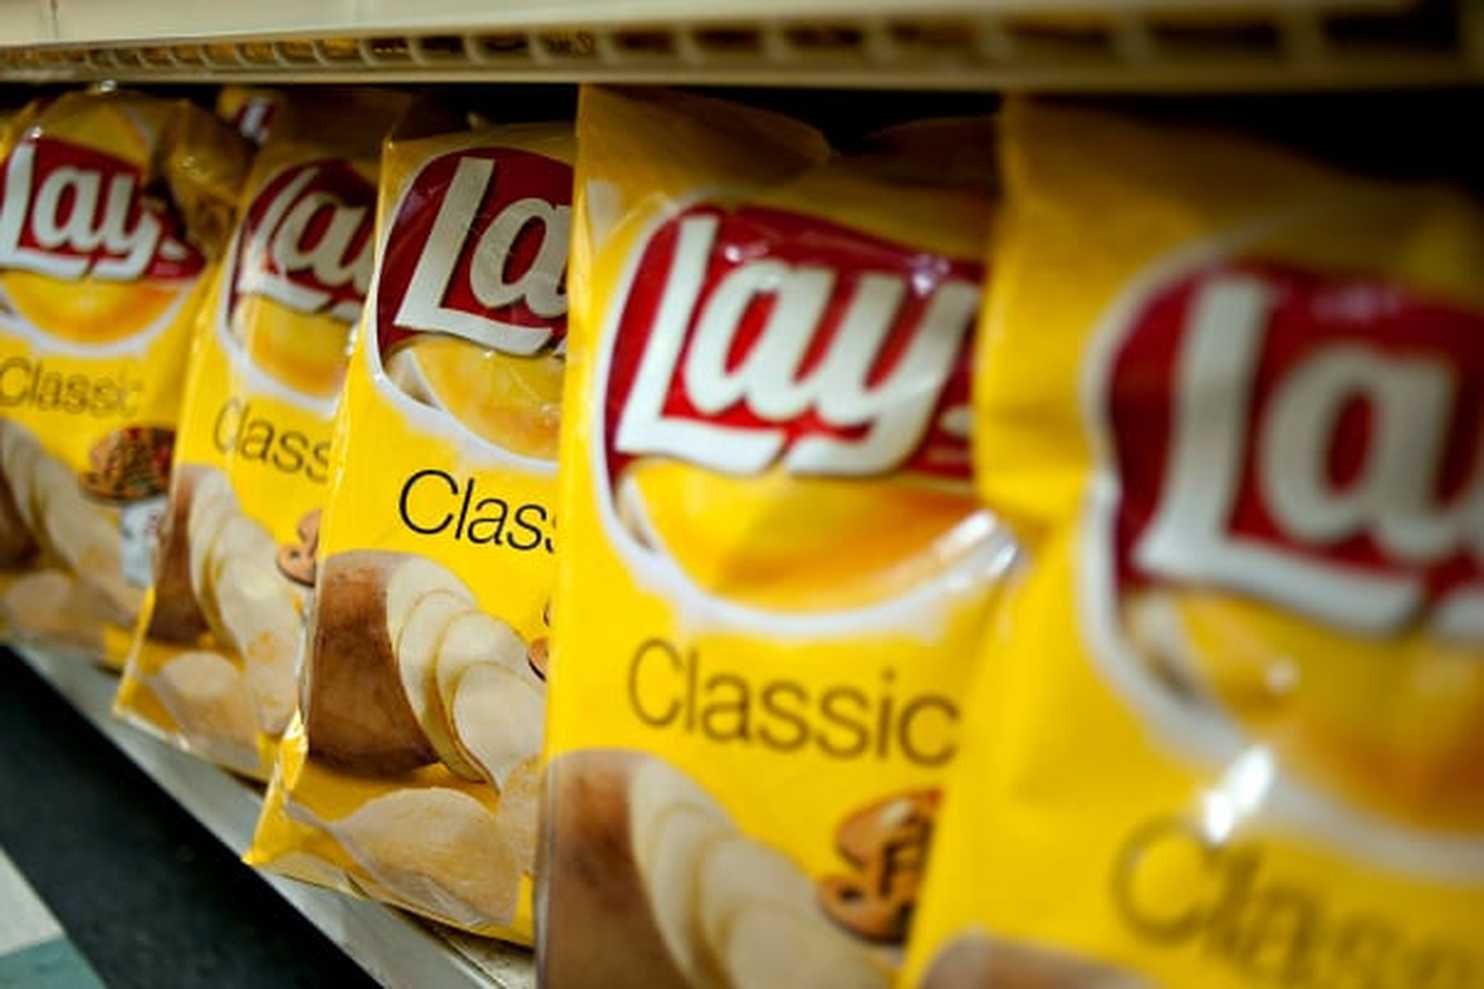 What Potato Chip Flavor Are You? lays chips